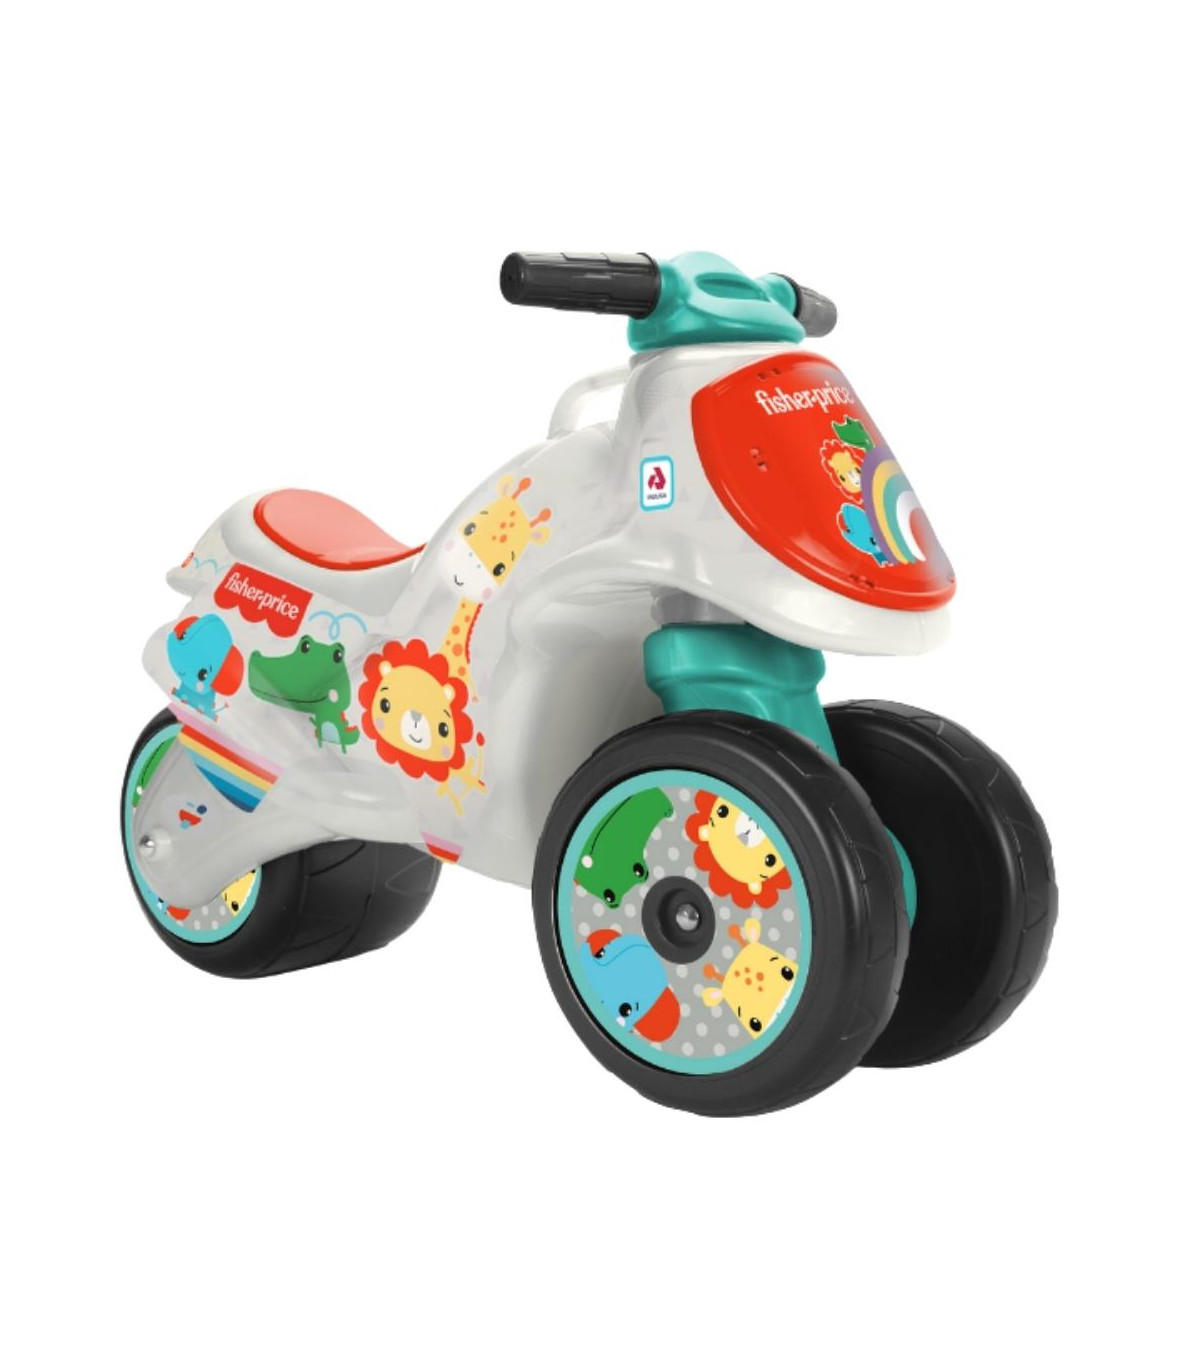 Injusa ® Fisher-Price Ride-On Scooter